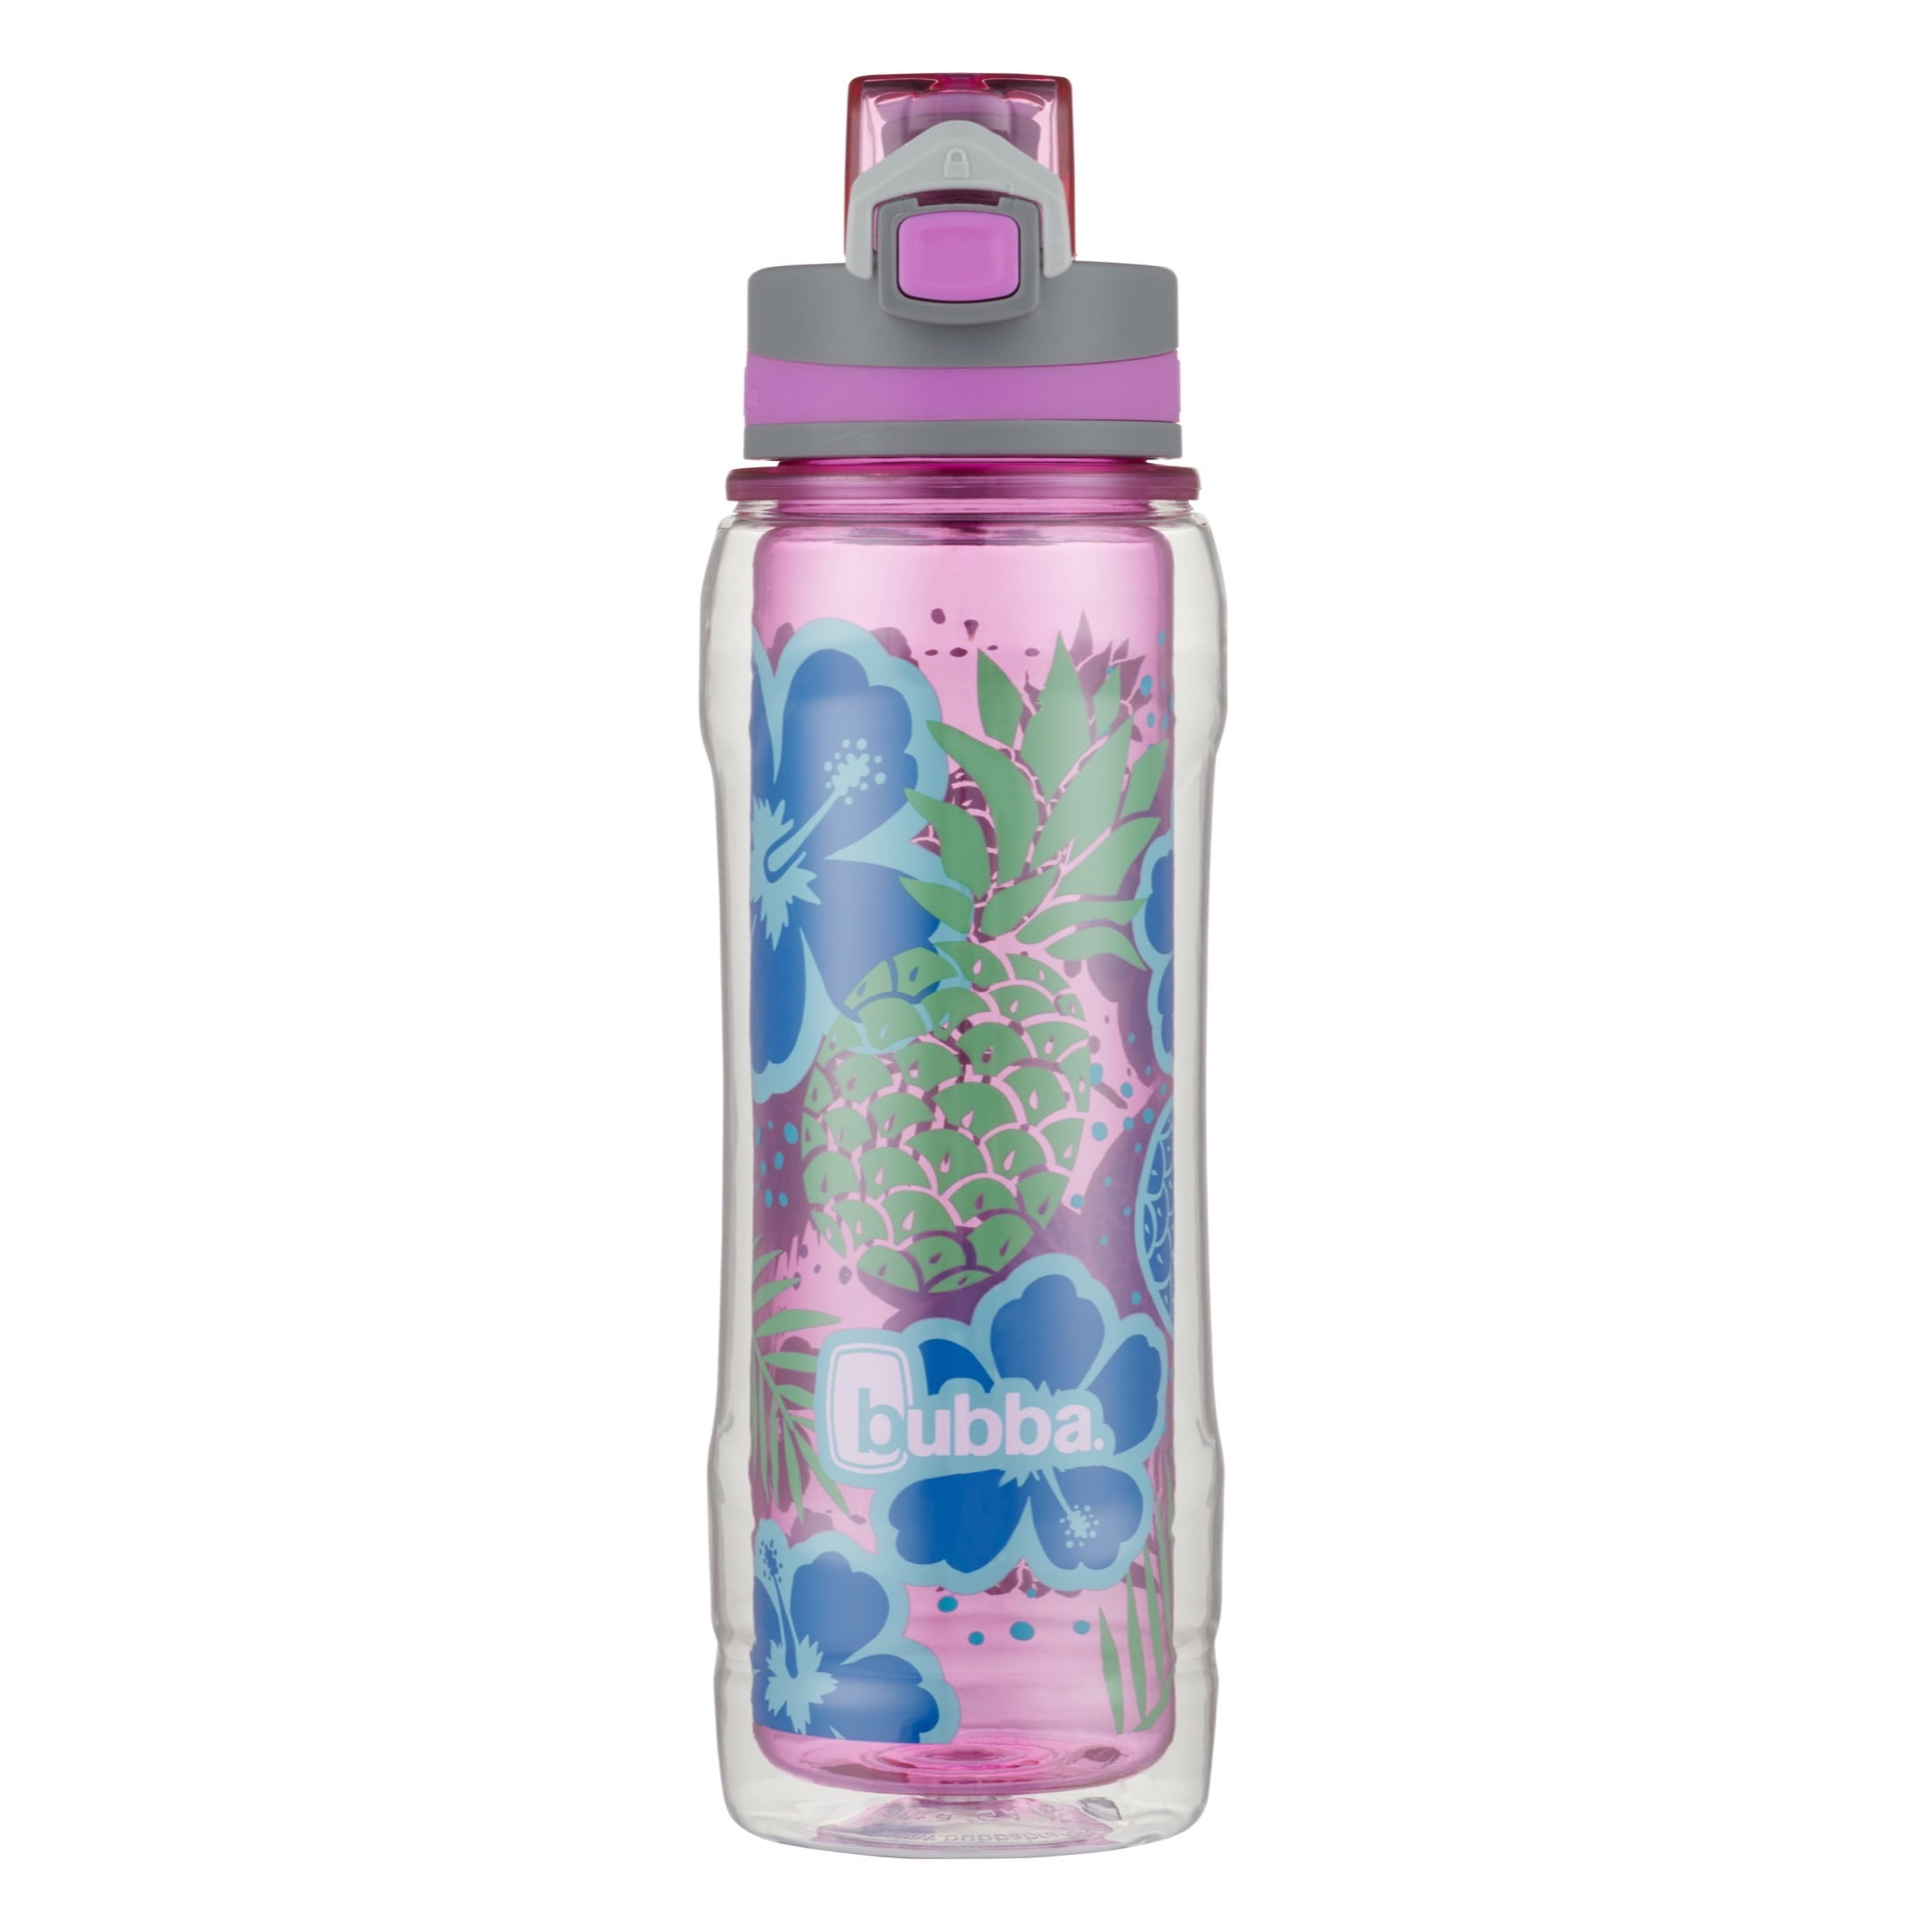 Bubba Flo Duo 24 oz Deep Sea and Gray Insulated Plastic Water Bottle with  Straw Lid 